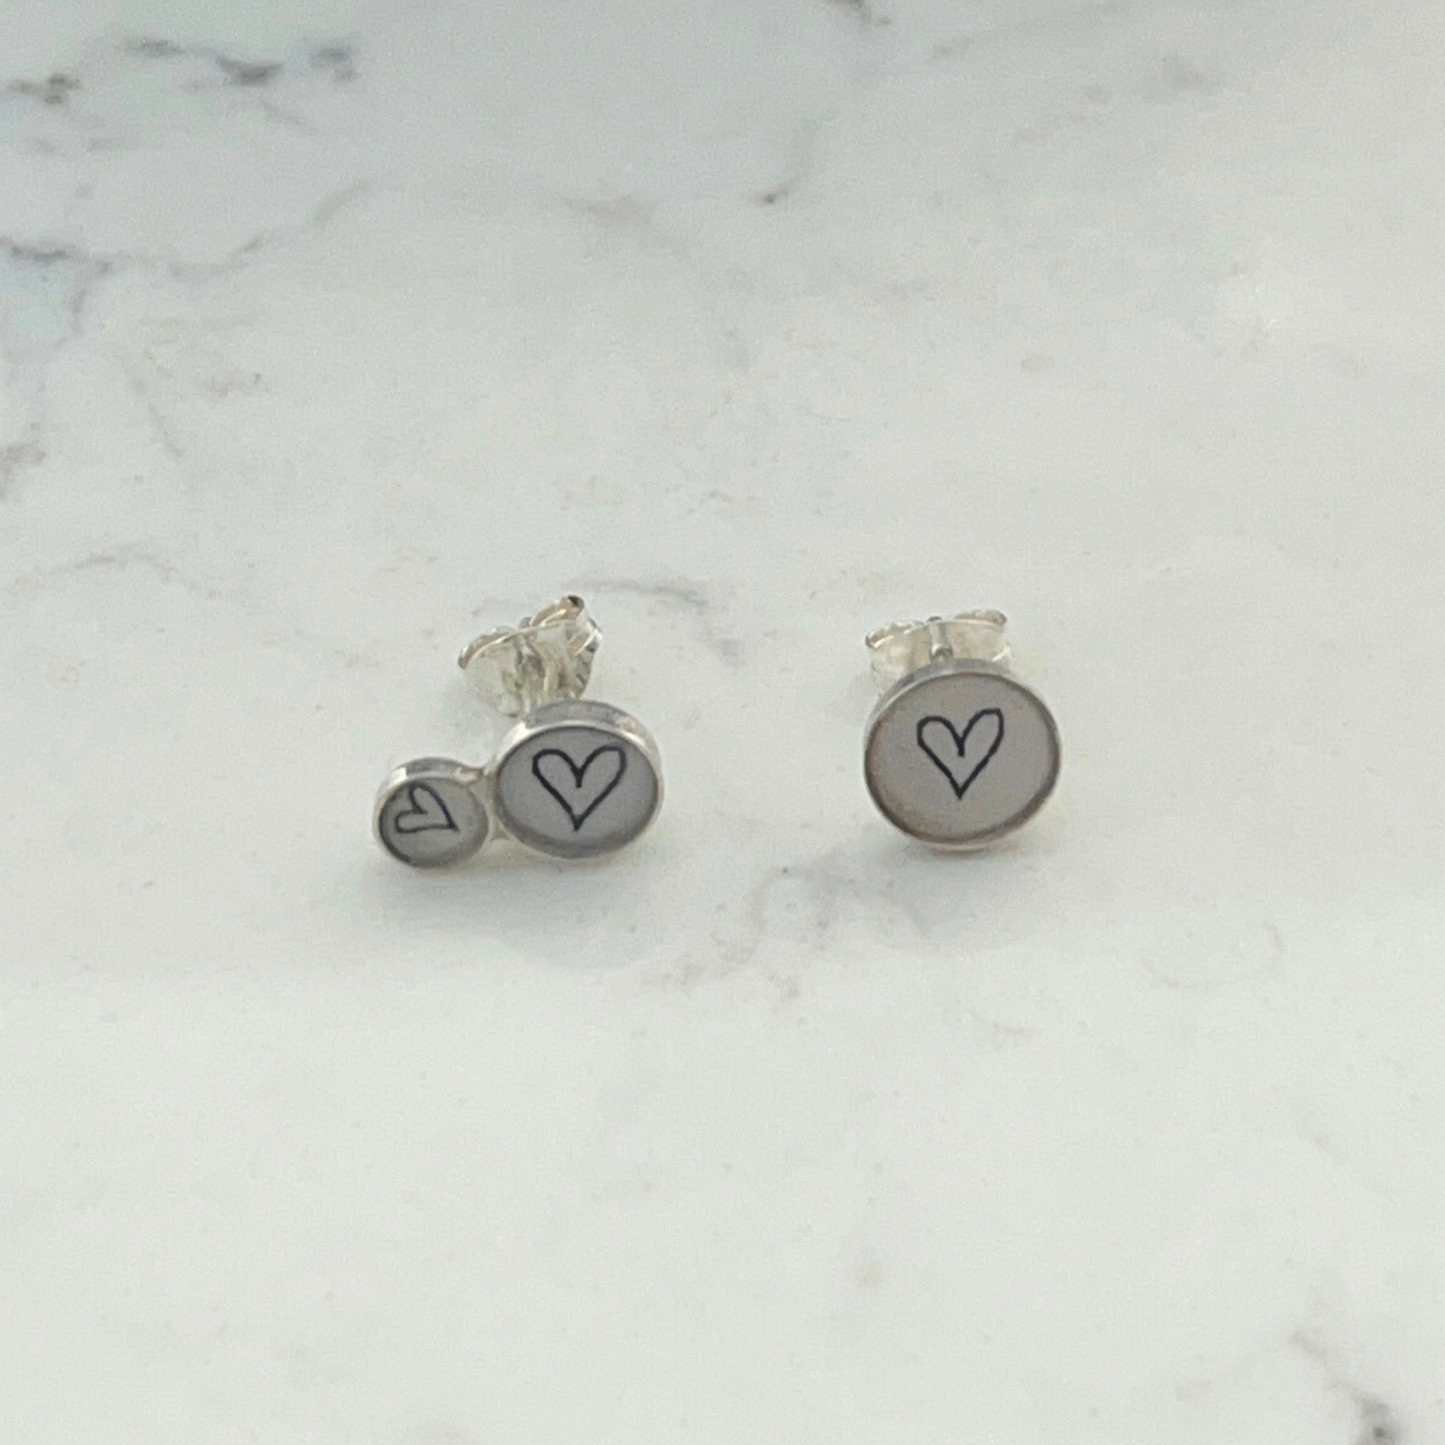 CLARE COLLINSON - Offset Sterling Silver Studs - Black Outlined Hearts